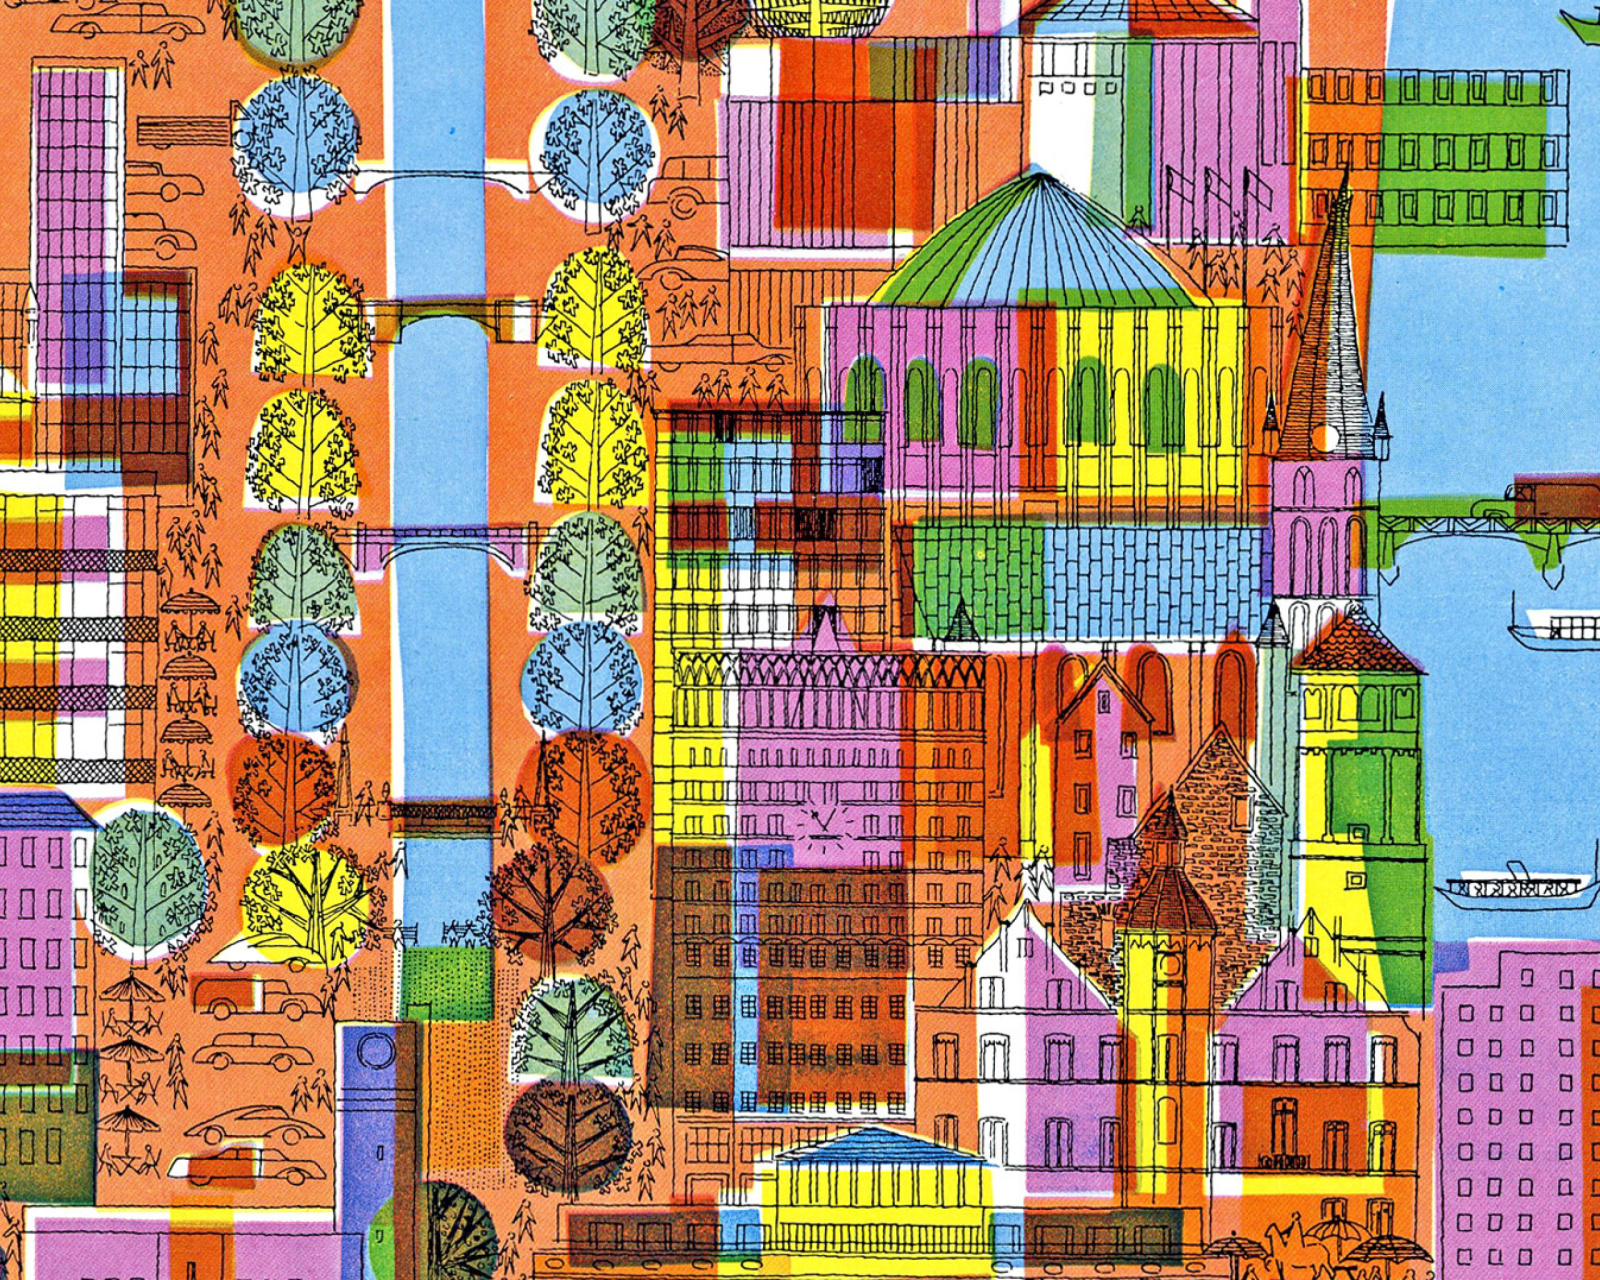 Town Illustration and Clipart screenshot #1 1600x1280